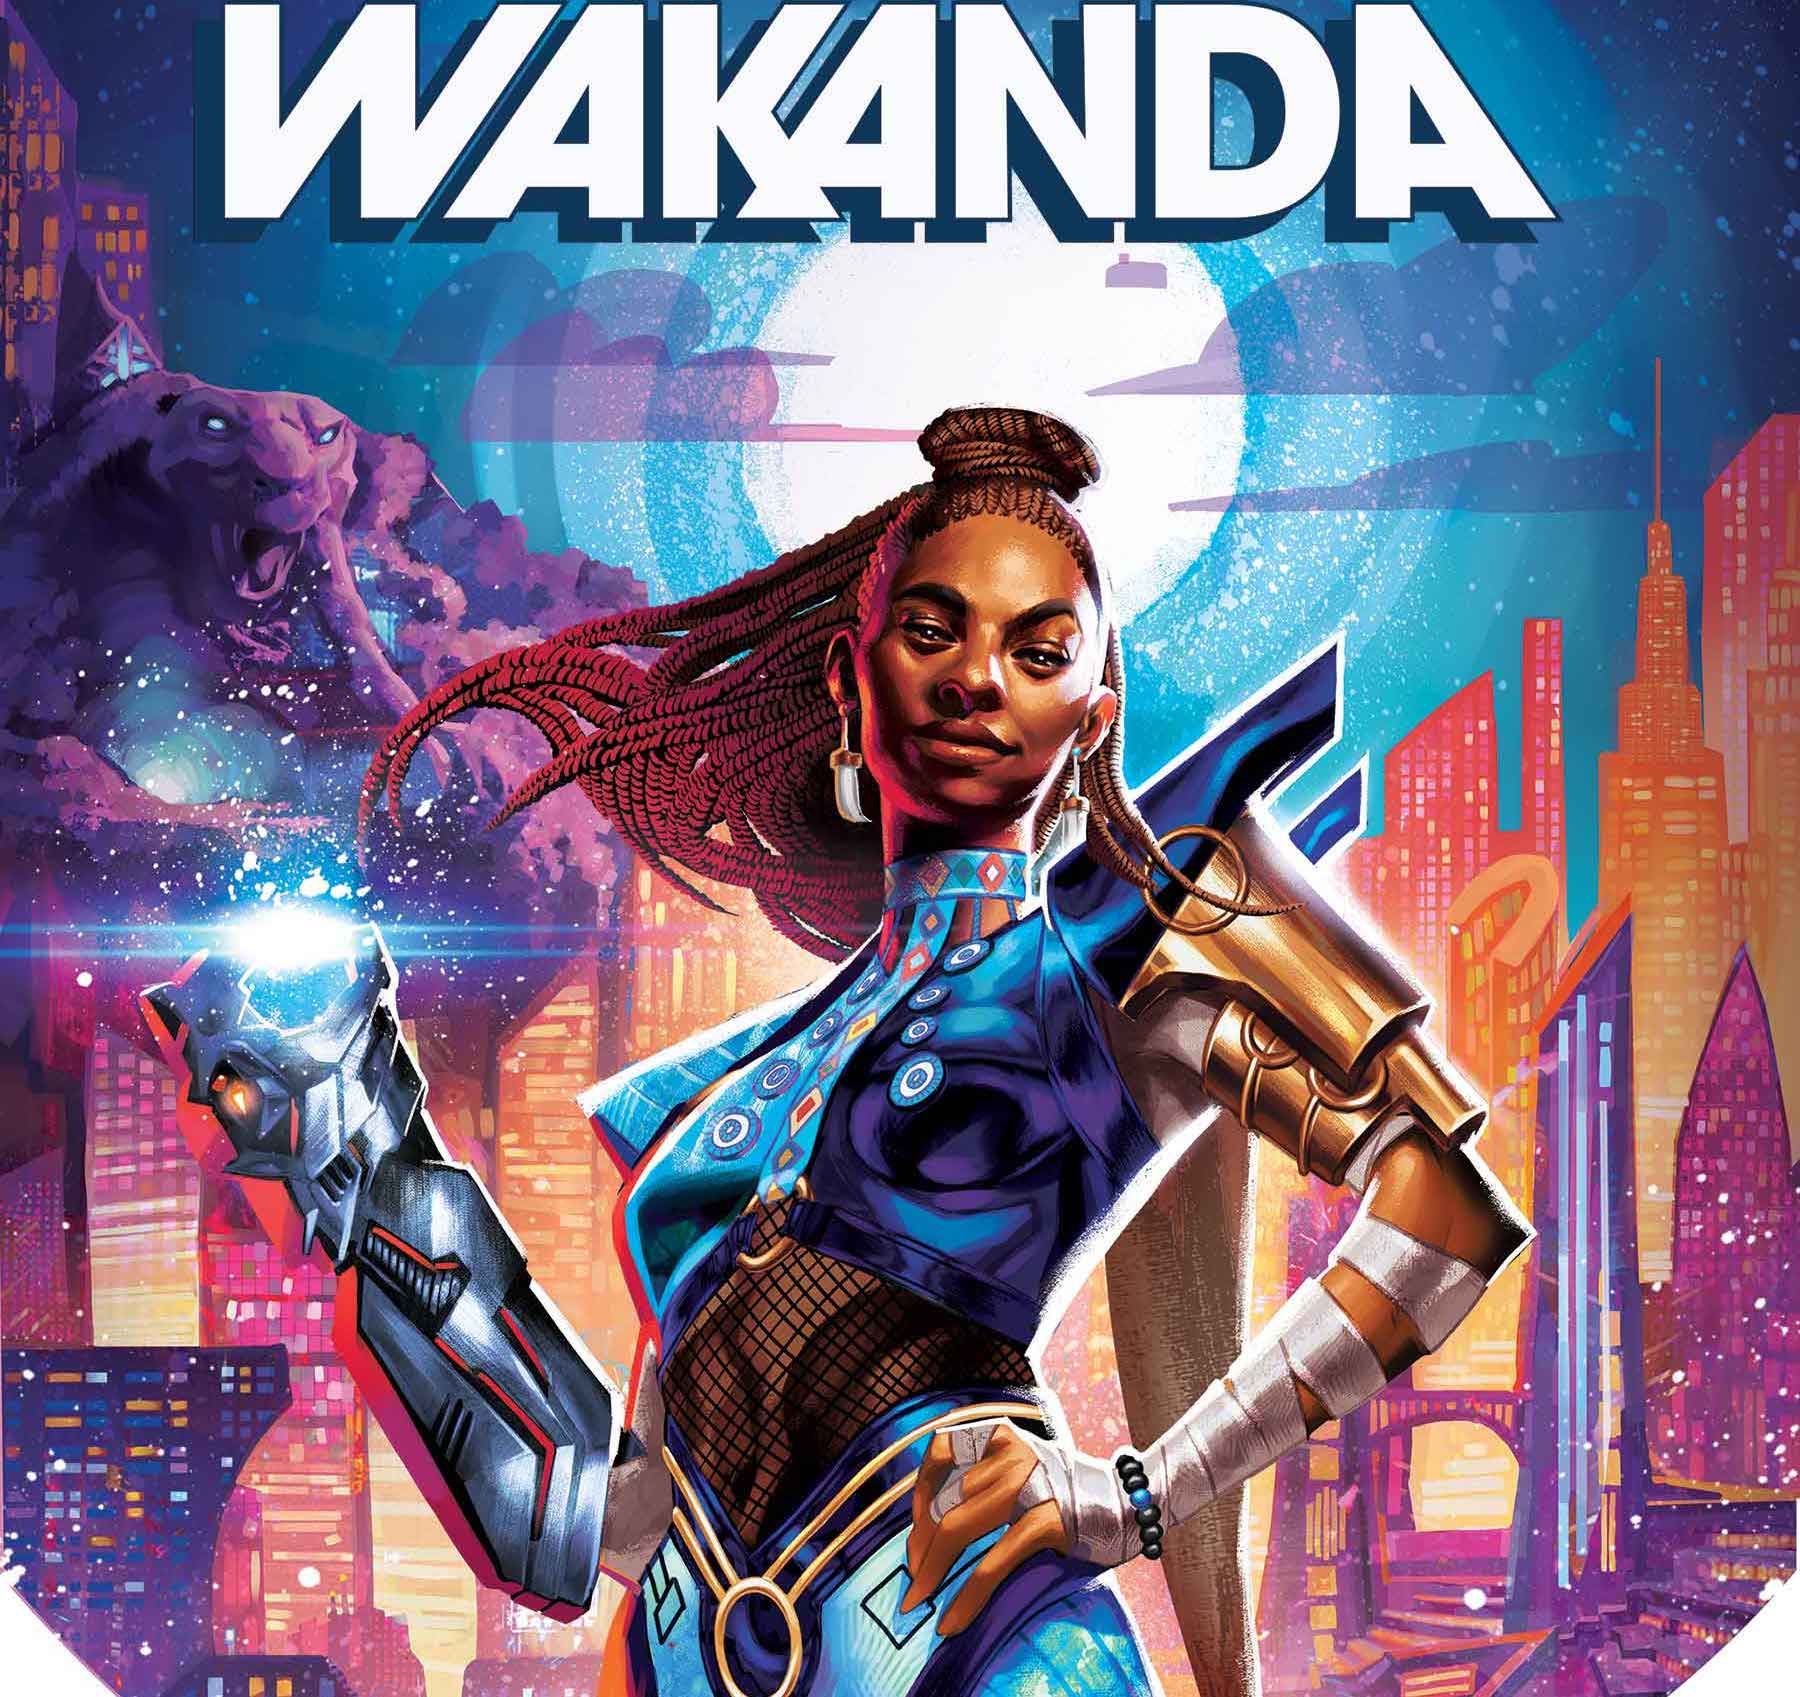 Marvel launching 'Wakanda' #1 October with 'History of the Black Panthers' backups